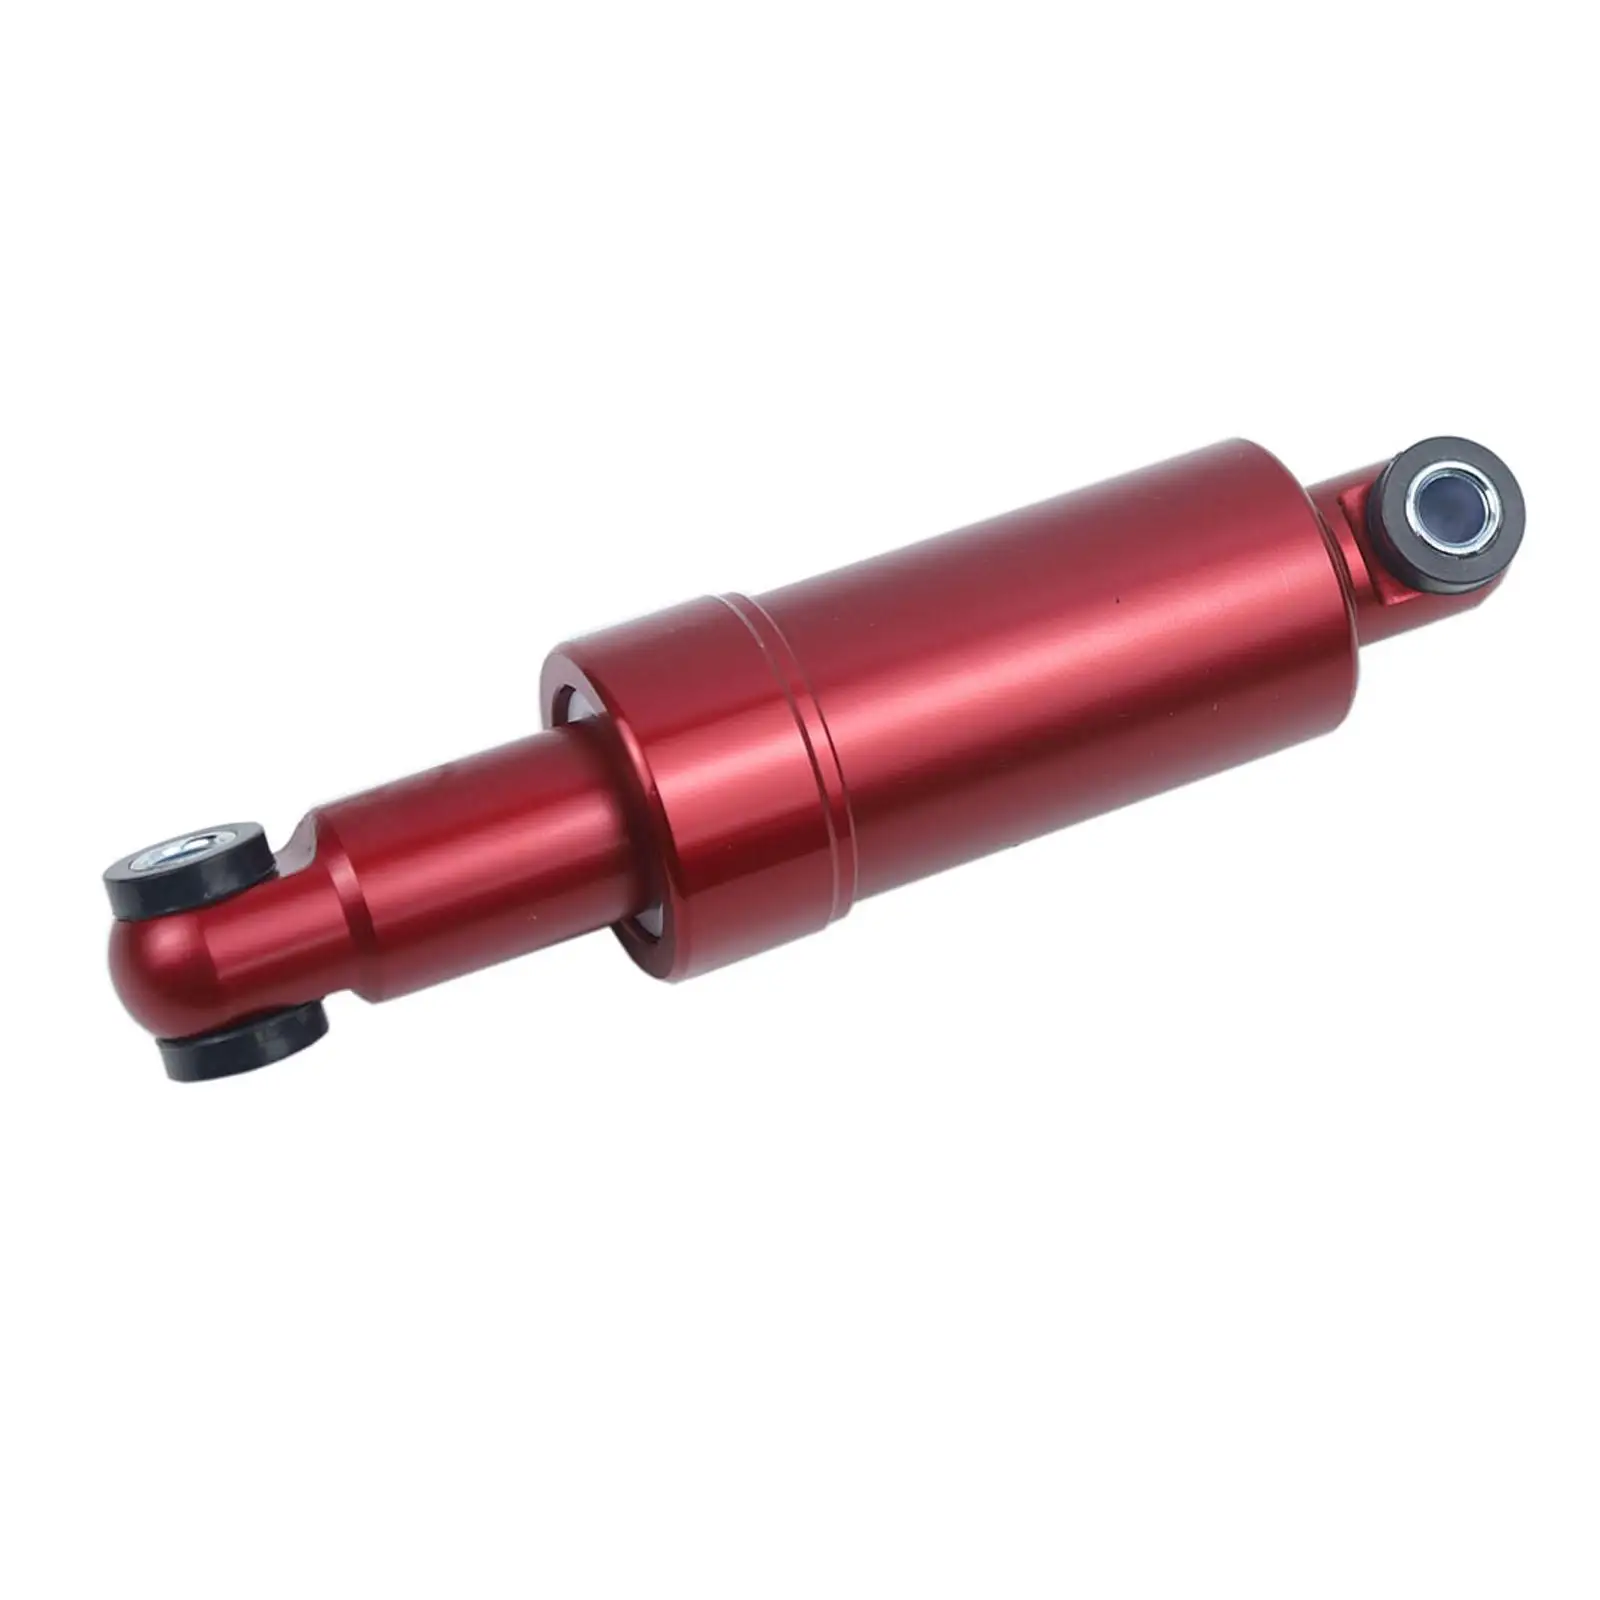 150mm Aluminum Alloy Rear Suspension Shock Absorber Replace for Electric Scooter